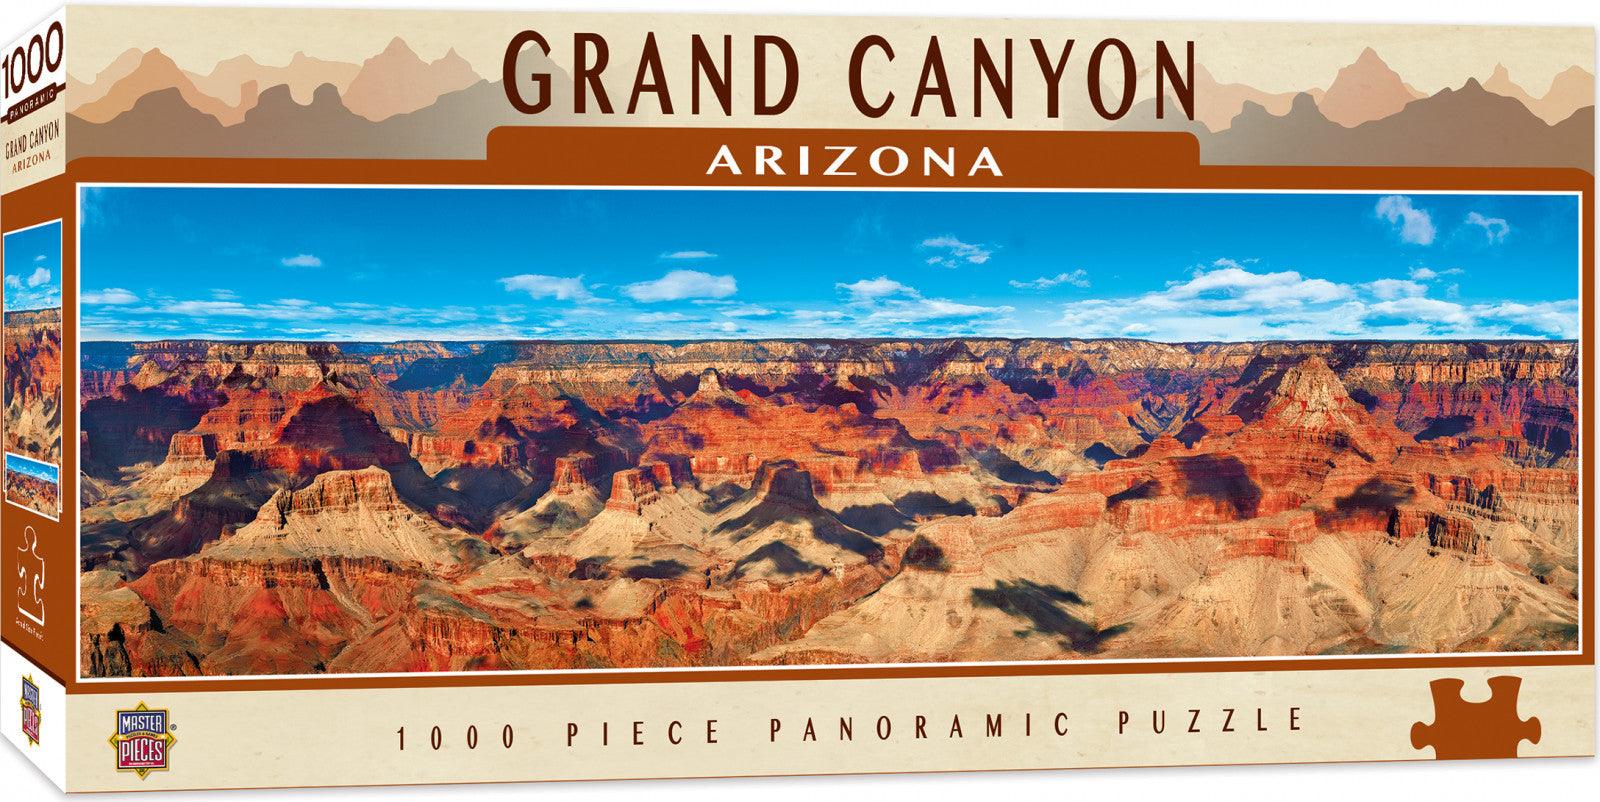 VR-81528 Masterpieces Puzzle City Panoramic Grand Canyon Puzzle 1,000 pieces - Masterpieces - Titan Pop Culture